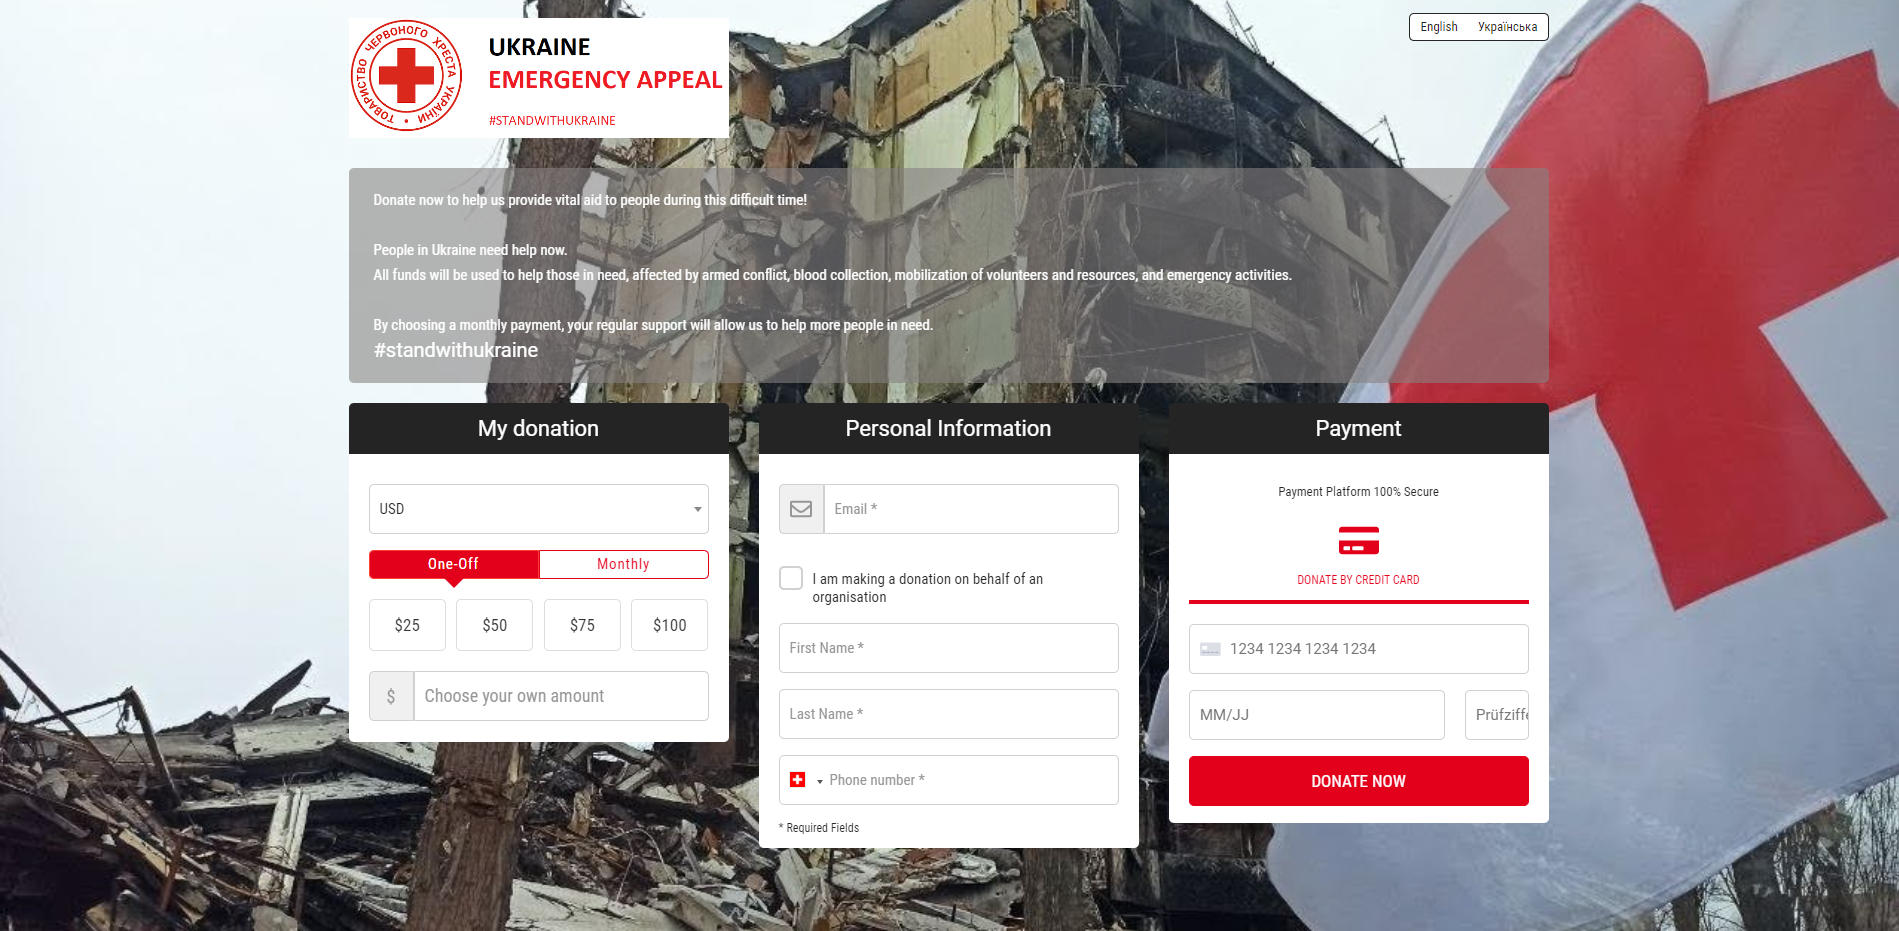 This image shows the browser view of a web page. In the background is a destroyed building, in the foreground are several forms asking for donation, personal information and payment method. 